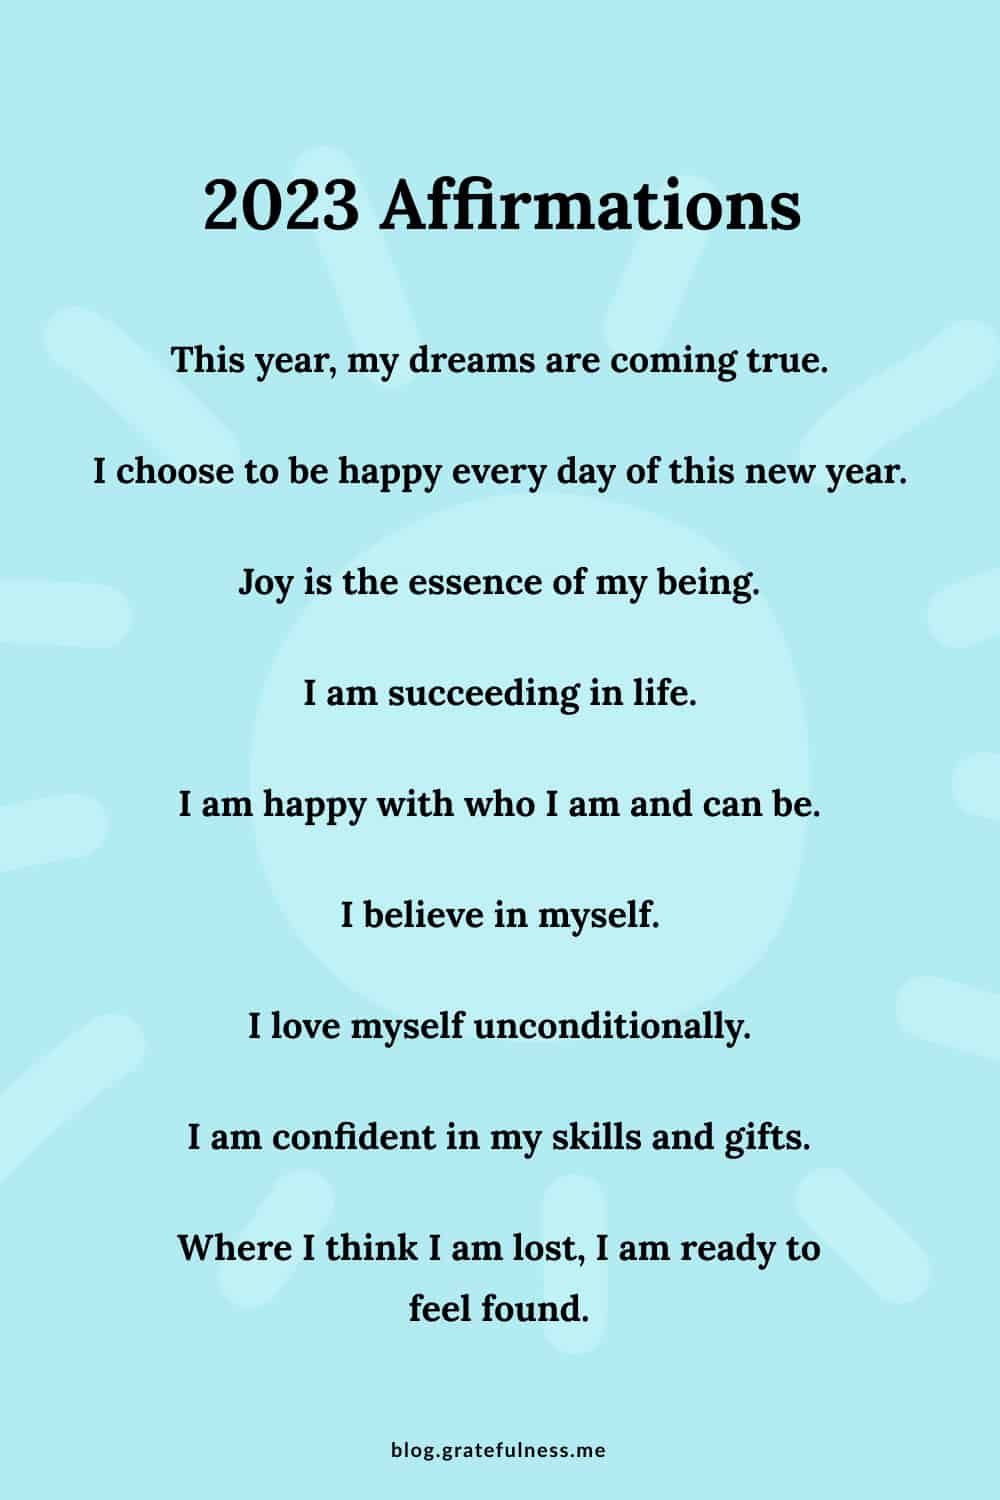 Image with list of 2023 affirmations